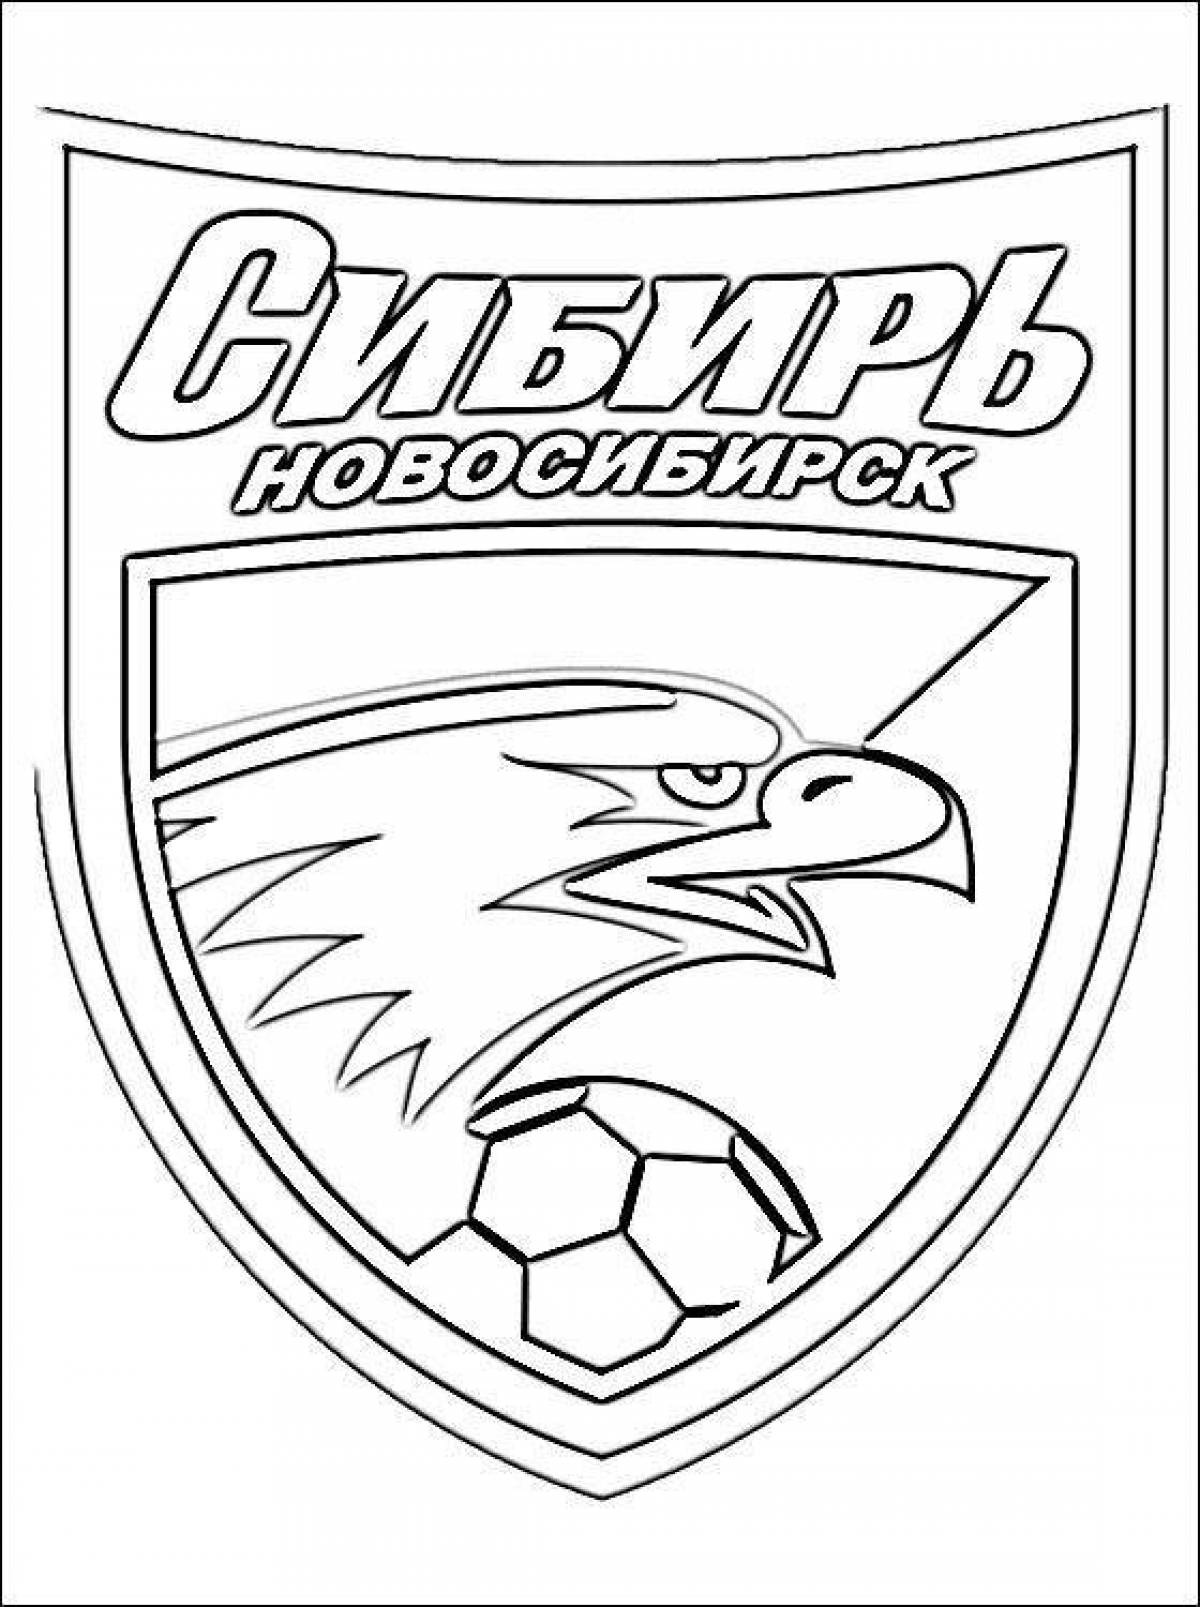 Playful football clubs coloring book